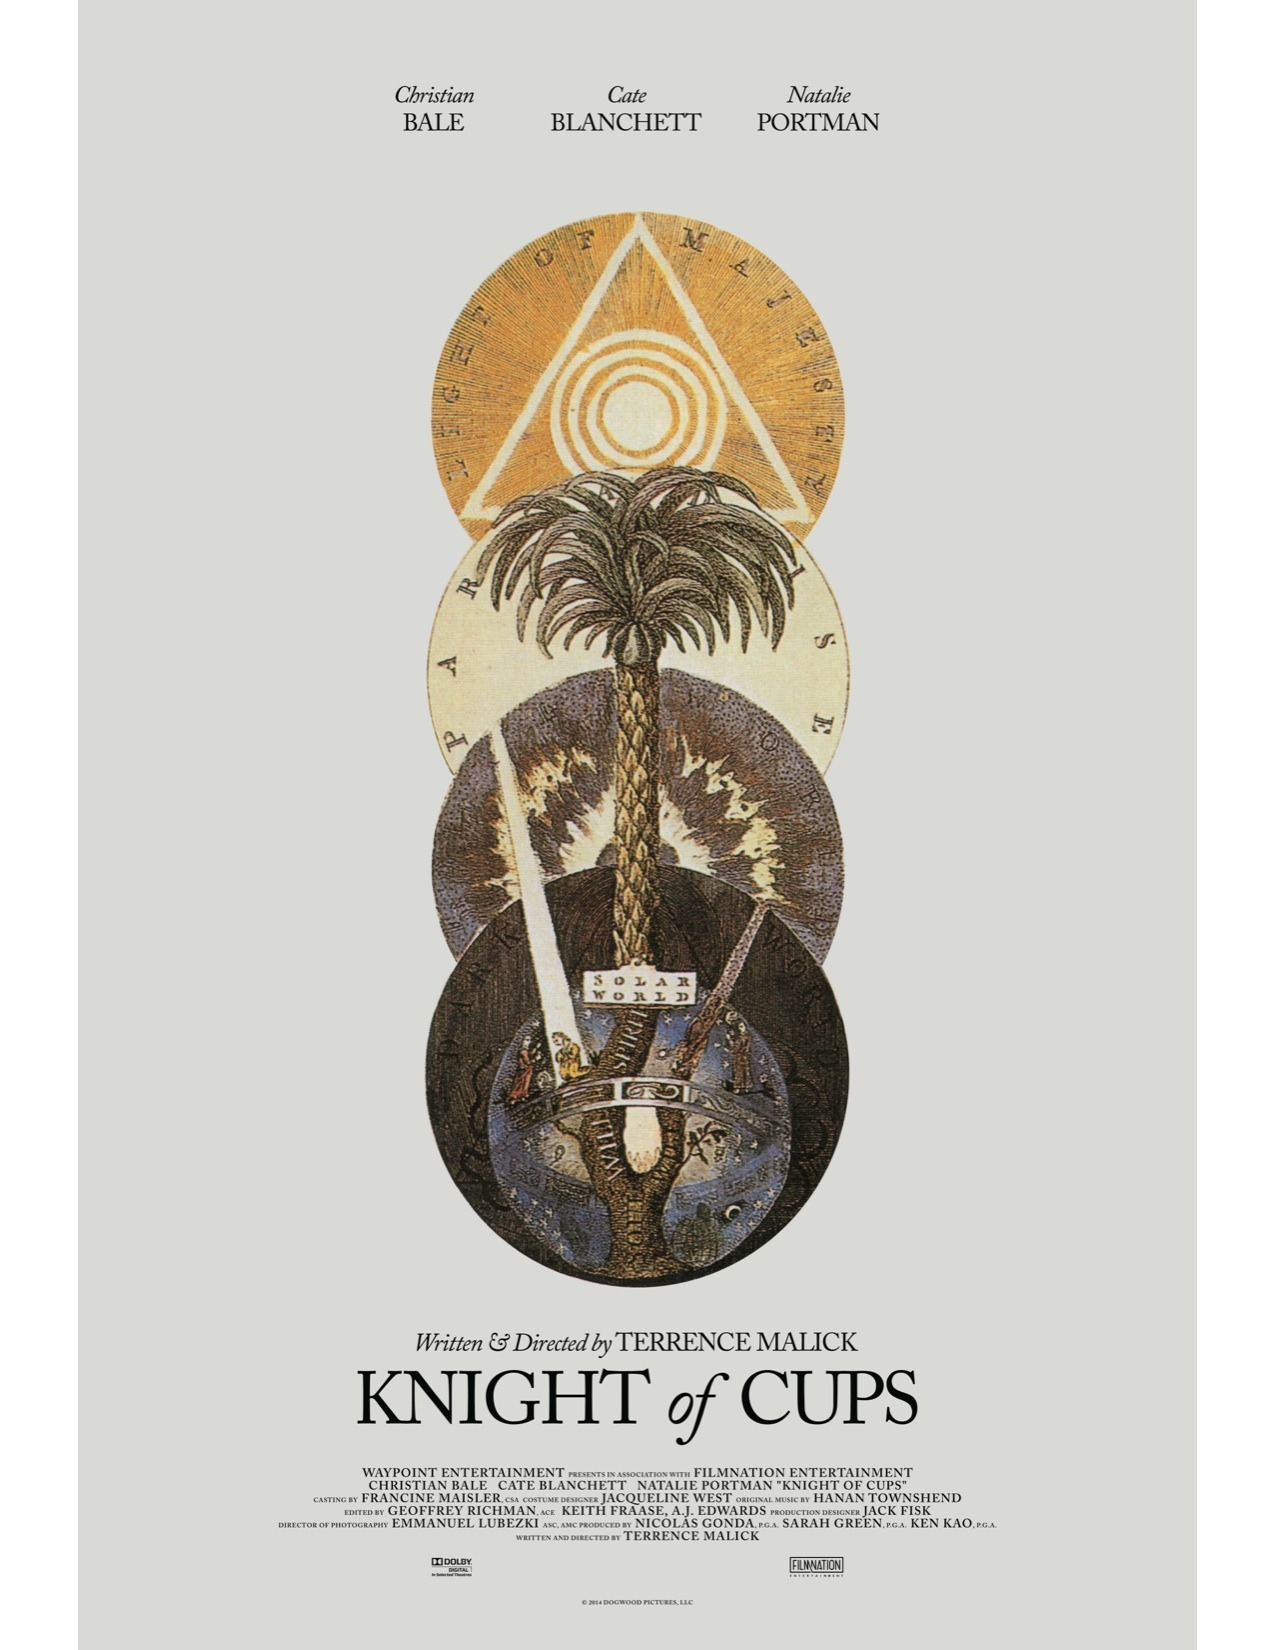 http://baleheadsblog.com/wp-content/uploads/2015/02/knight-of-cups-poster.jpg